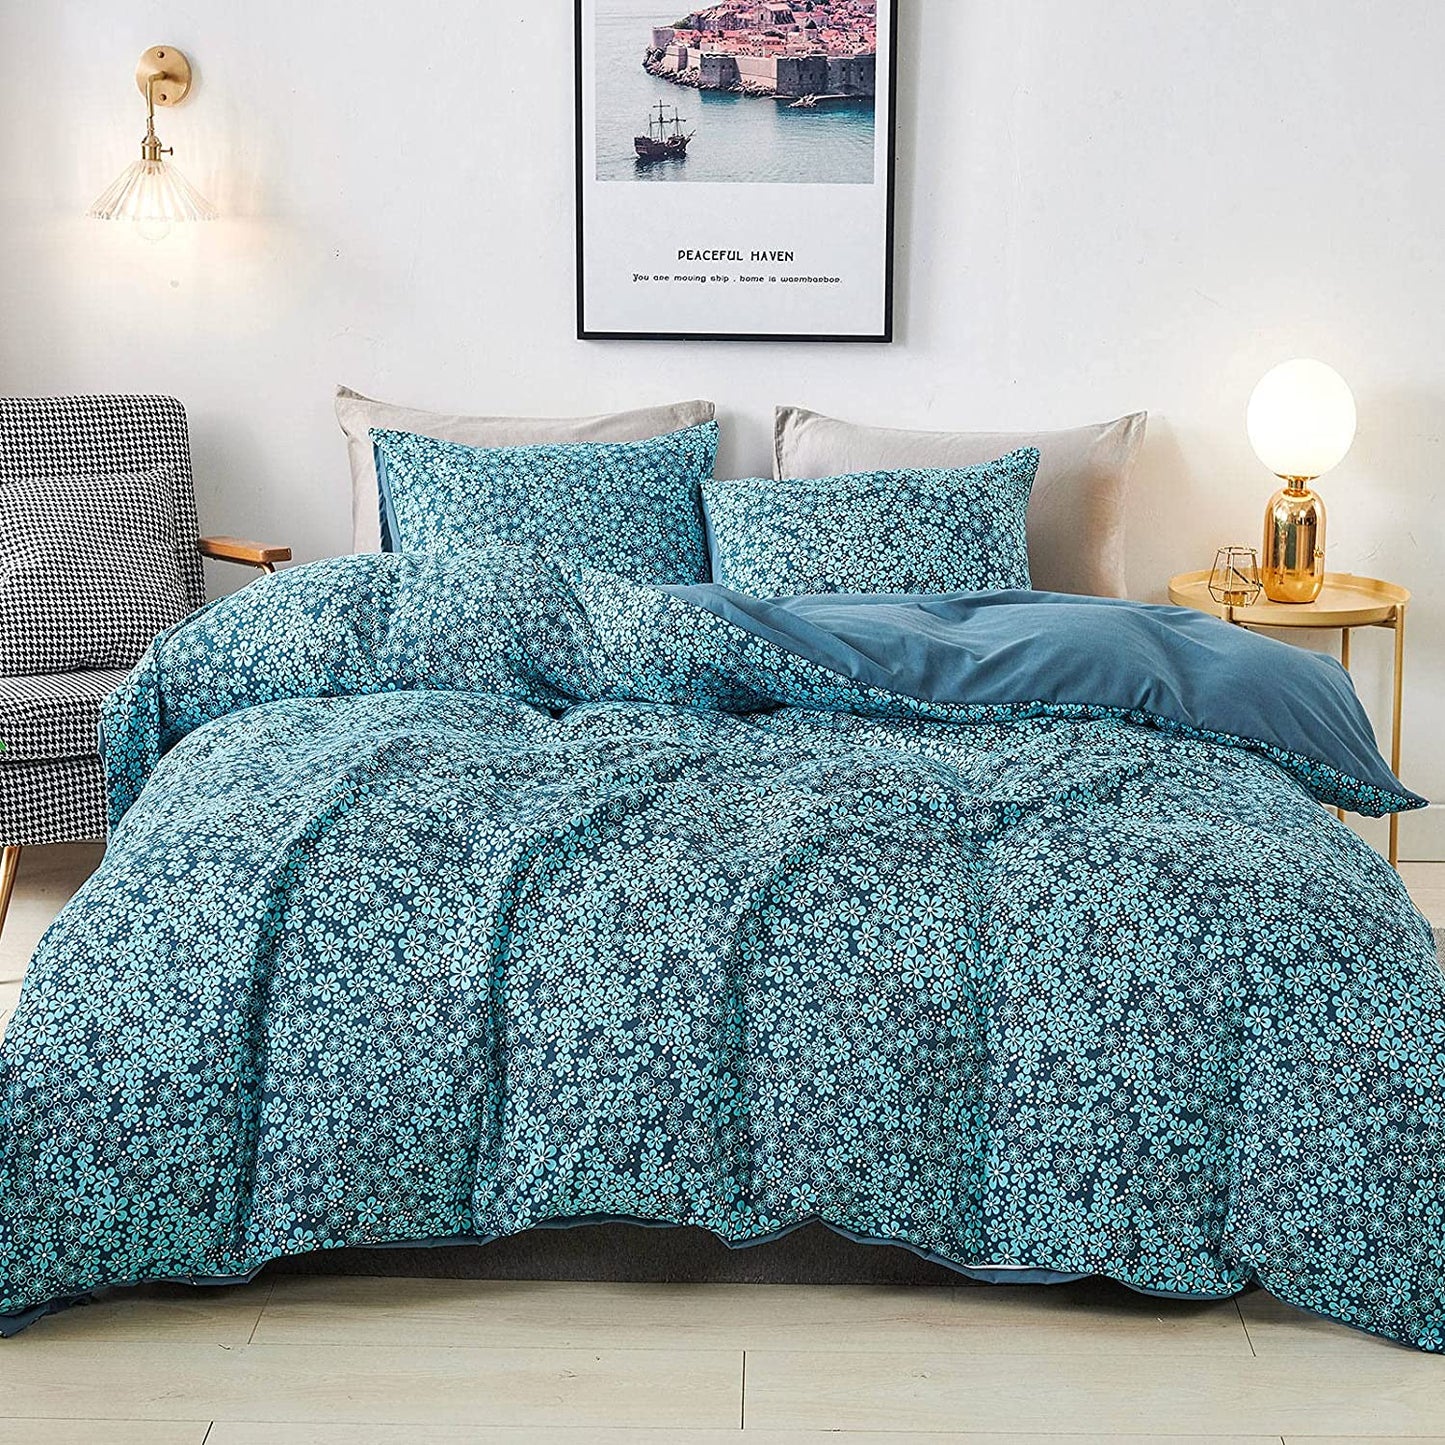 Duvet Cover Queen Size - Ultrafine Fiber Comforter Cover, Super Soft Bedding Sets Thickened Microfiber Duvet Cover Set, Floral Comforter Set All Season Use, 3 Piece-Wildflower